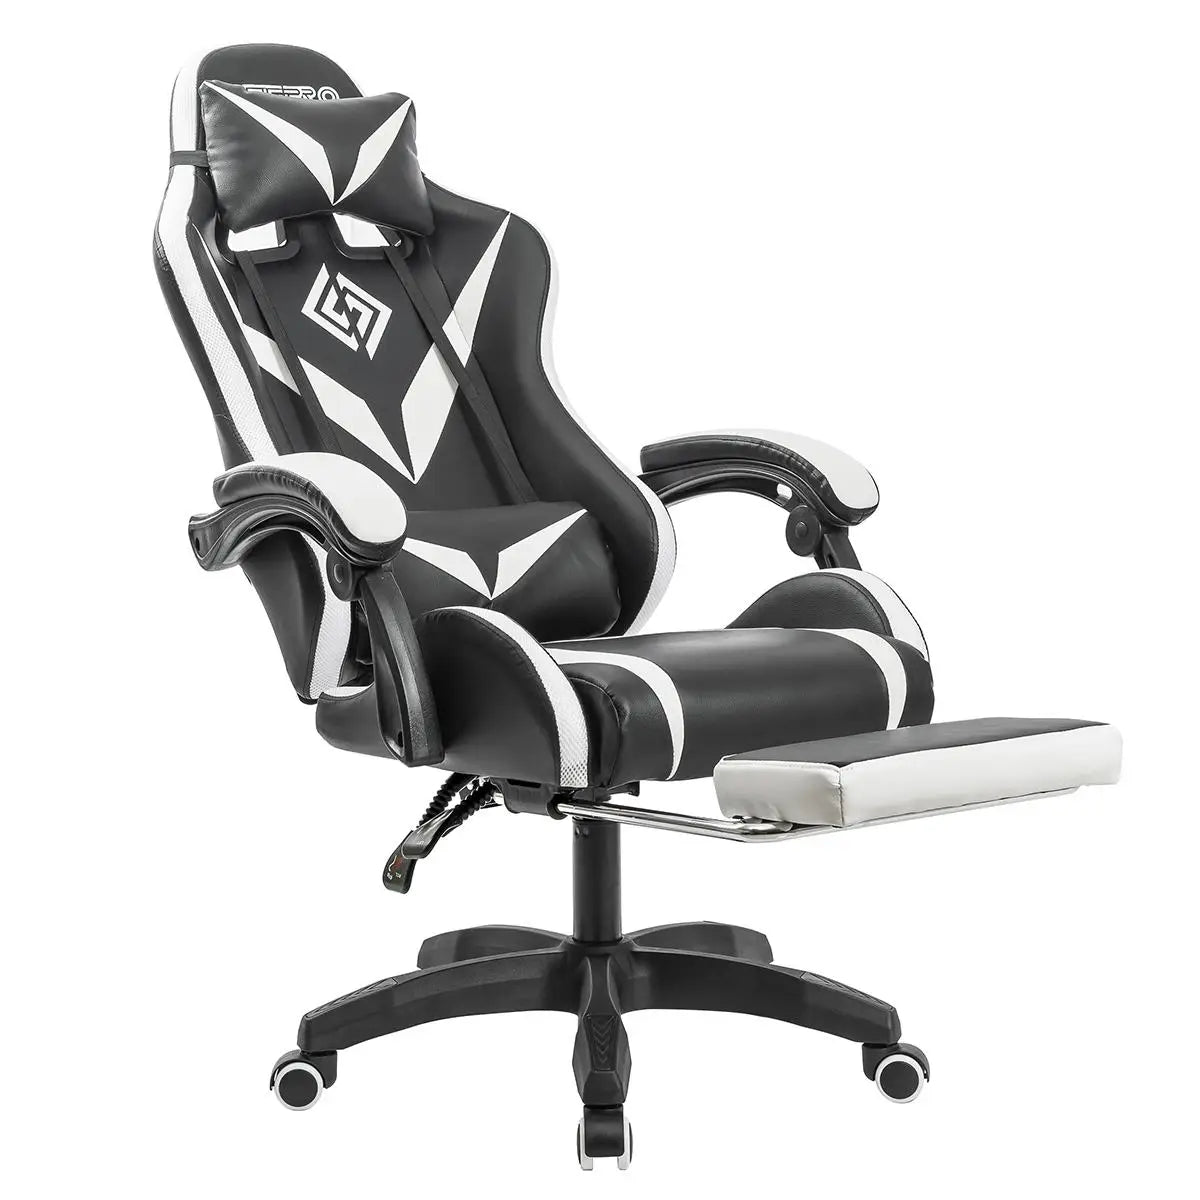 RGB Light Gaming Chair Office Chair with 135° Reclining & Footrest - Ergonomic Swivel Chair with 2 Point Massage - Farefe